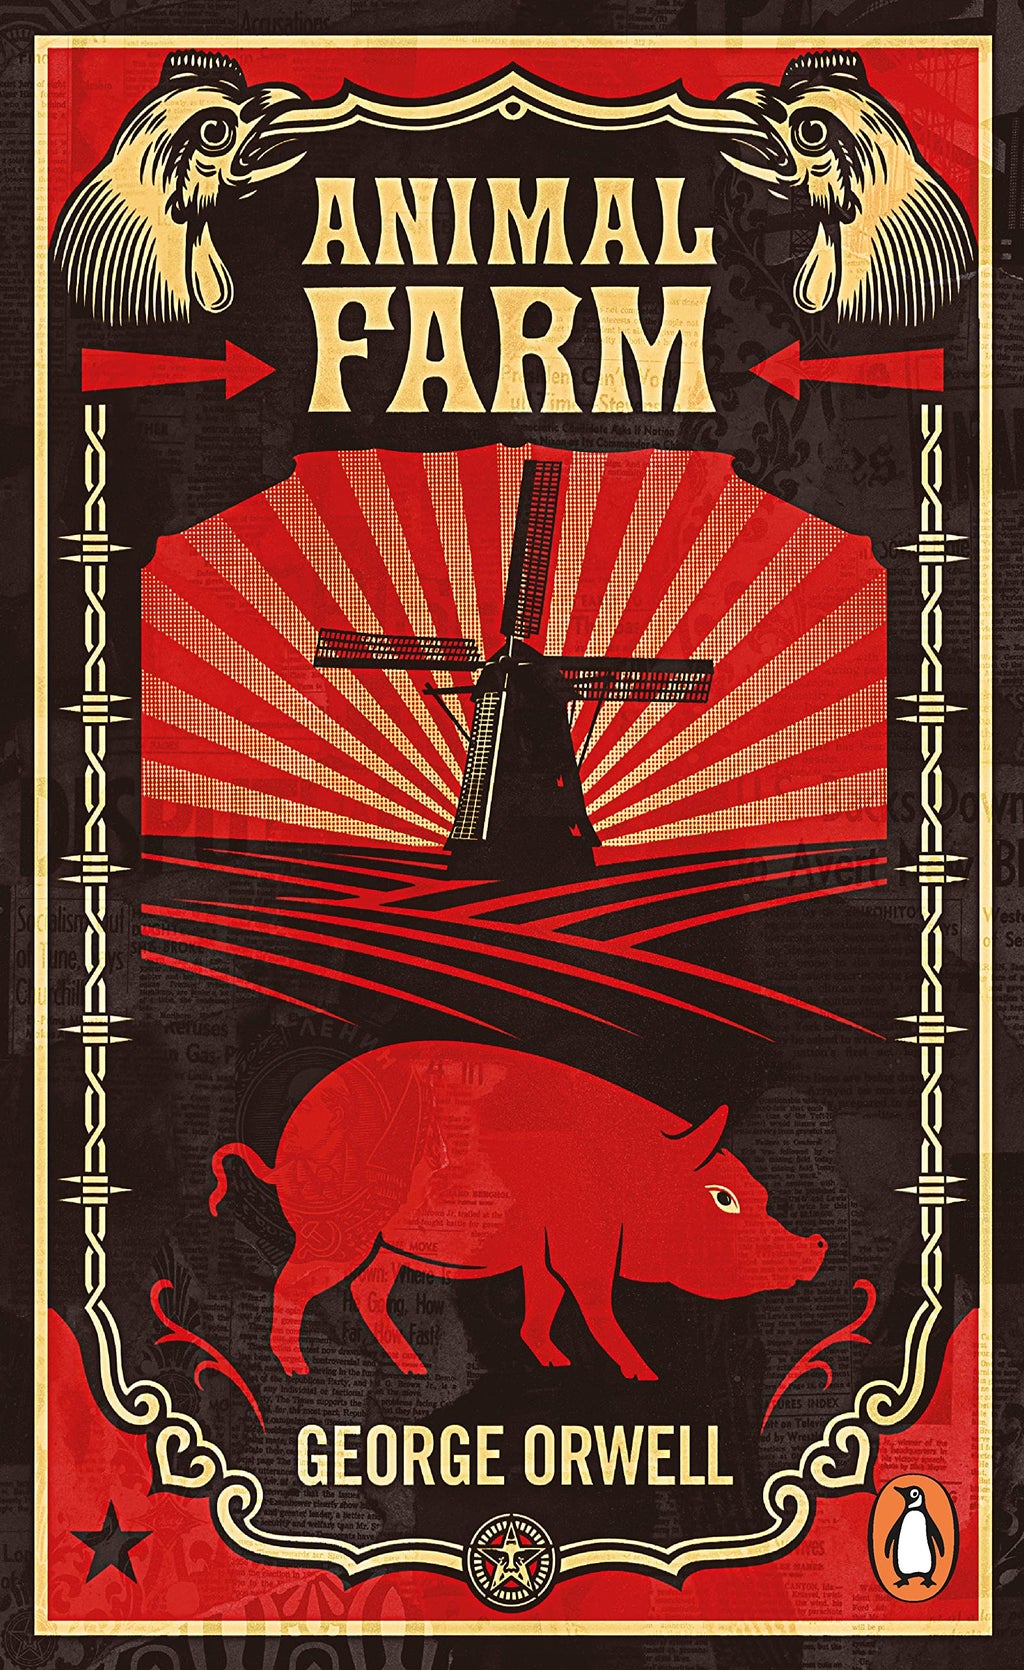 Cover of “Animal Farm”, by George Orwell